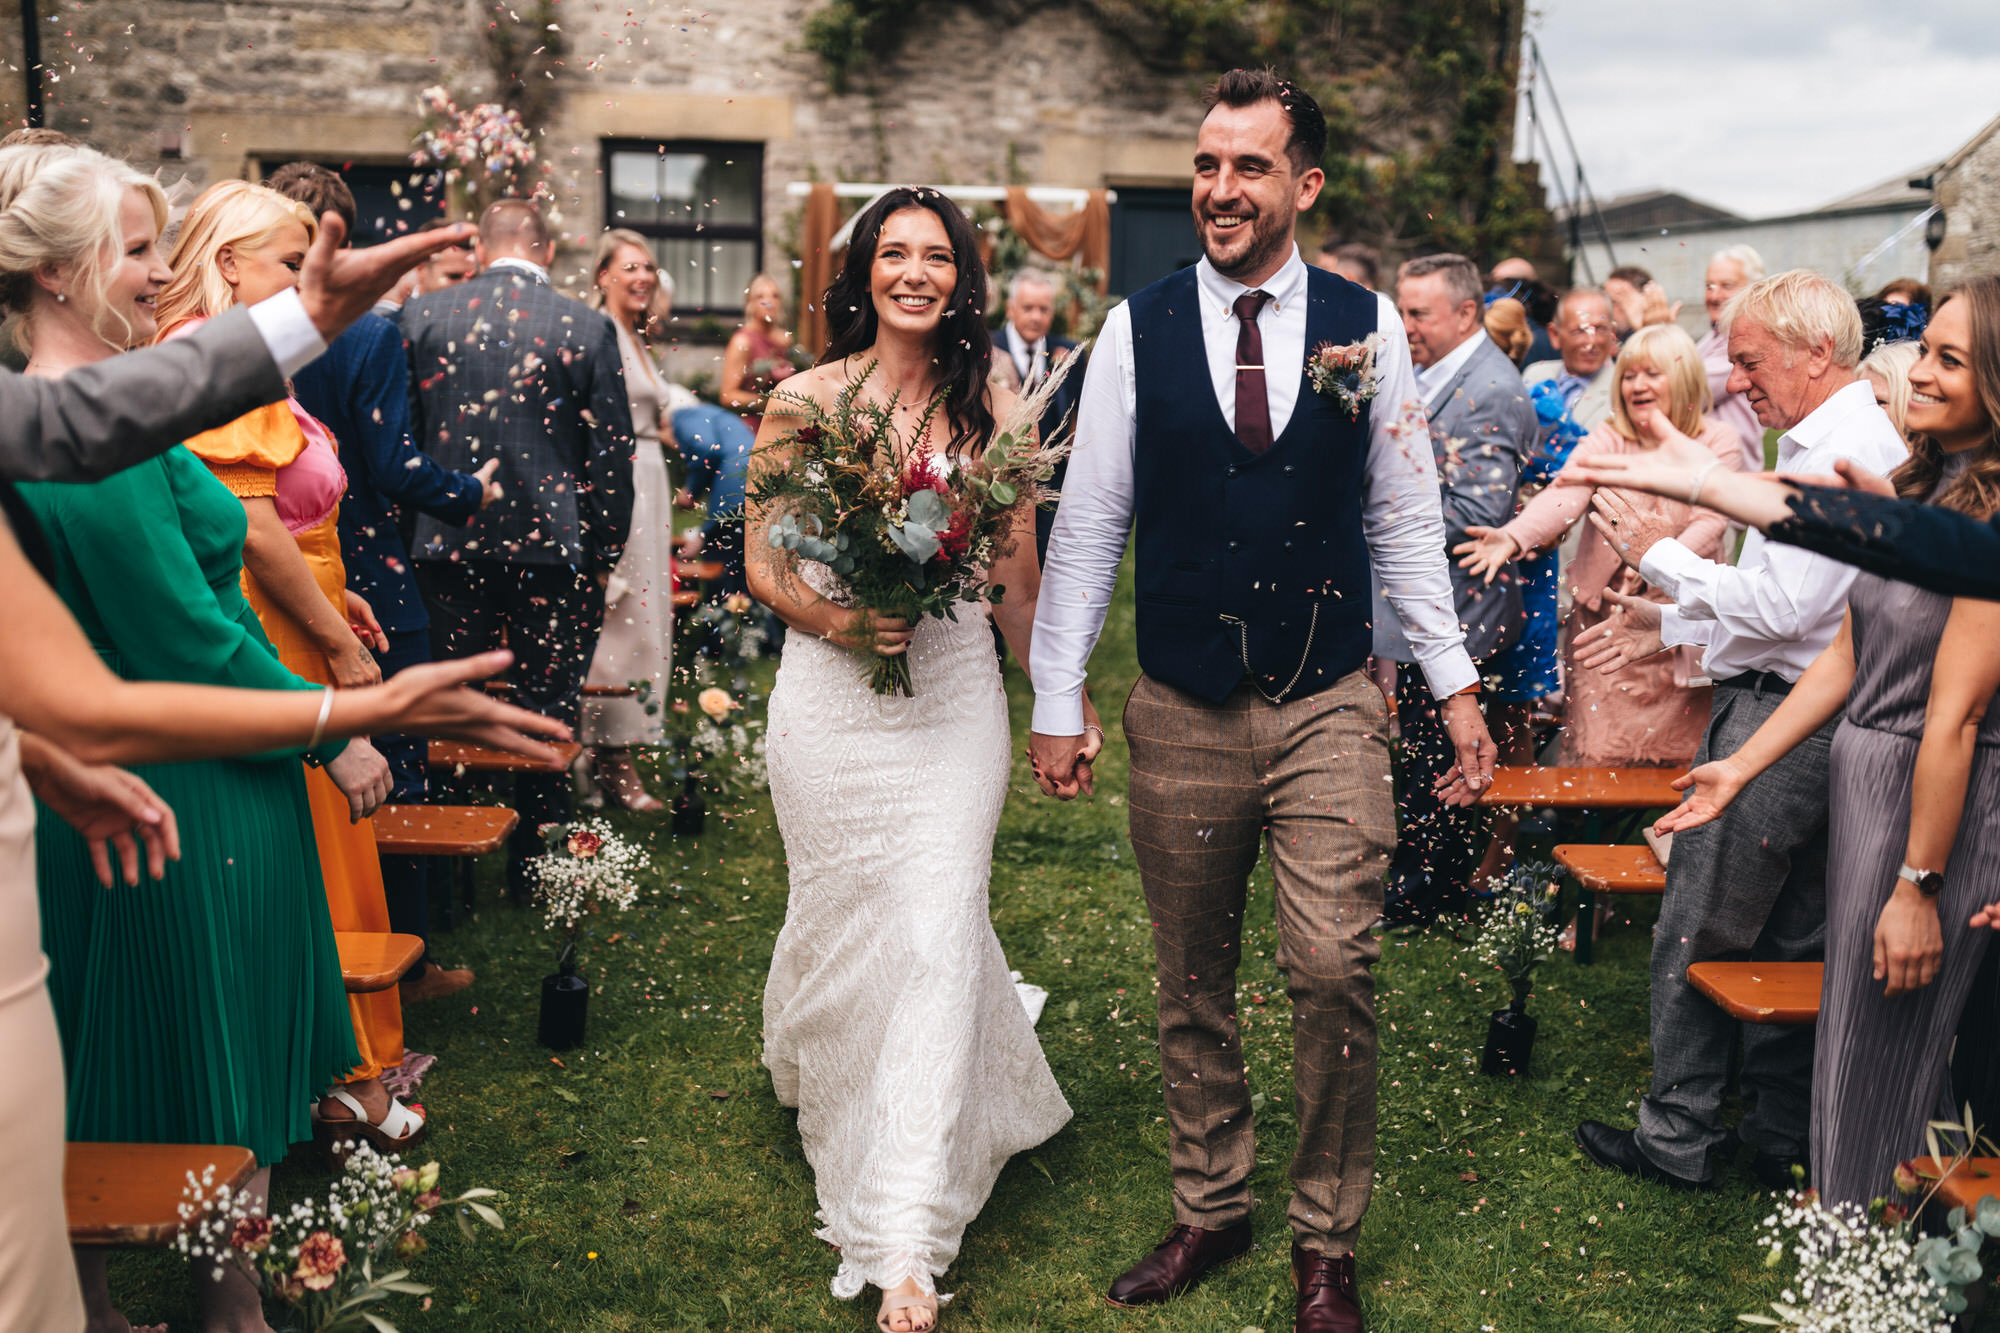 guests throw confetti at couple as they walk back down the aisle married